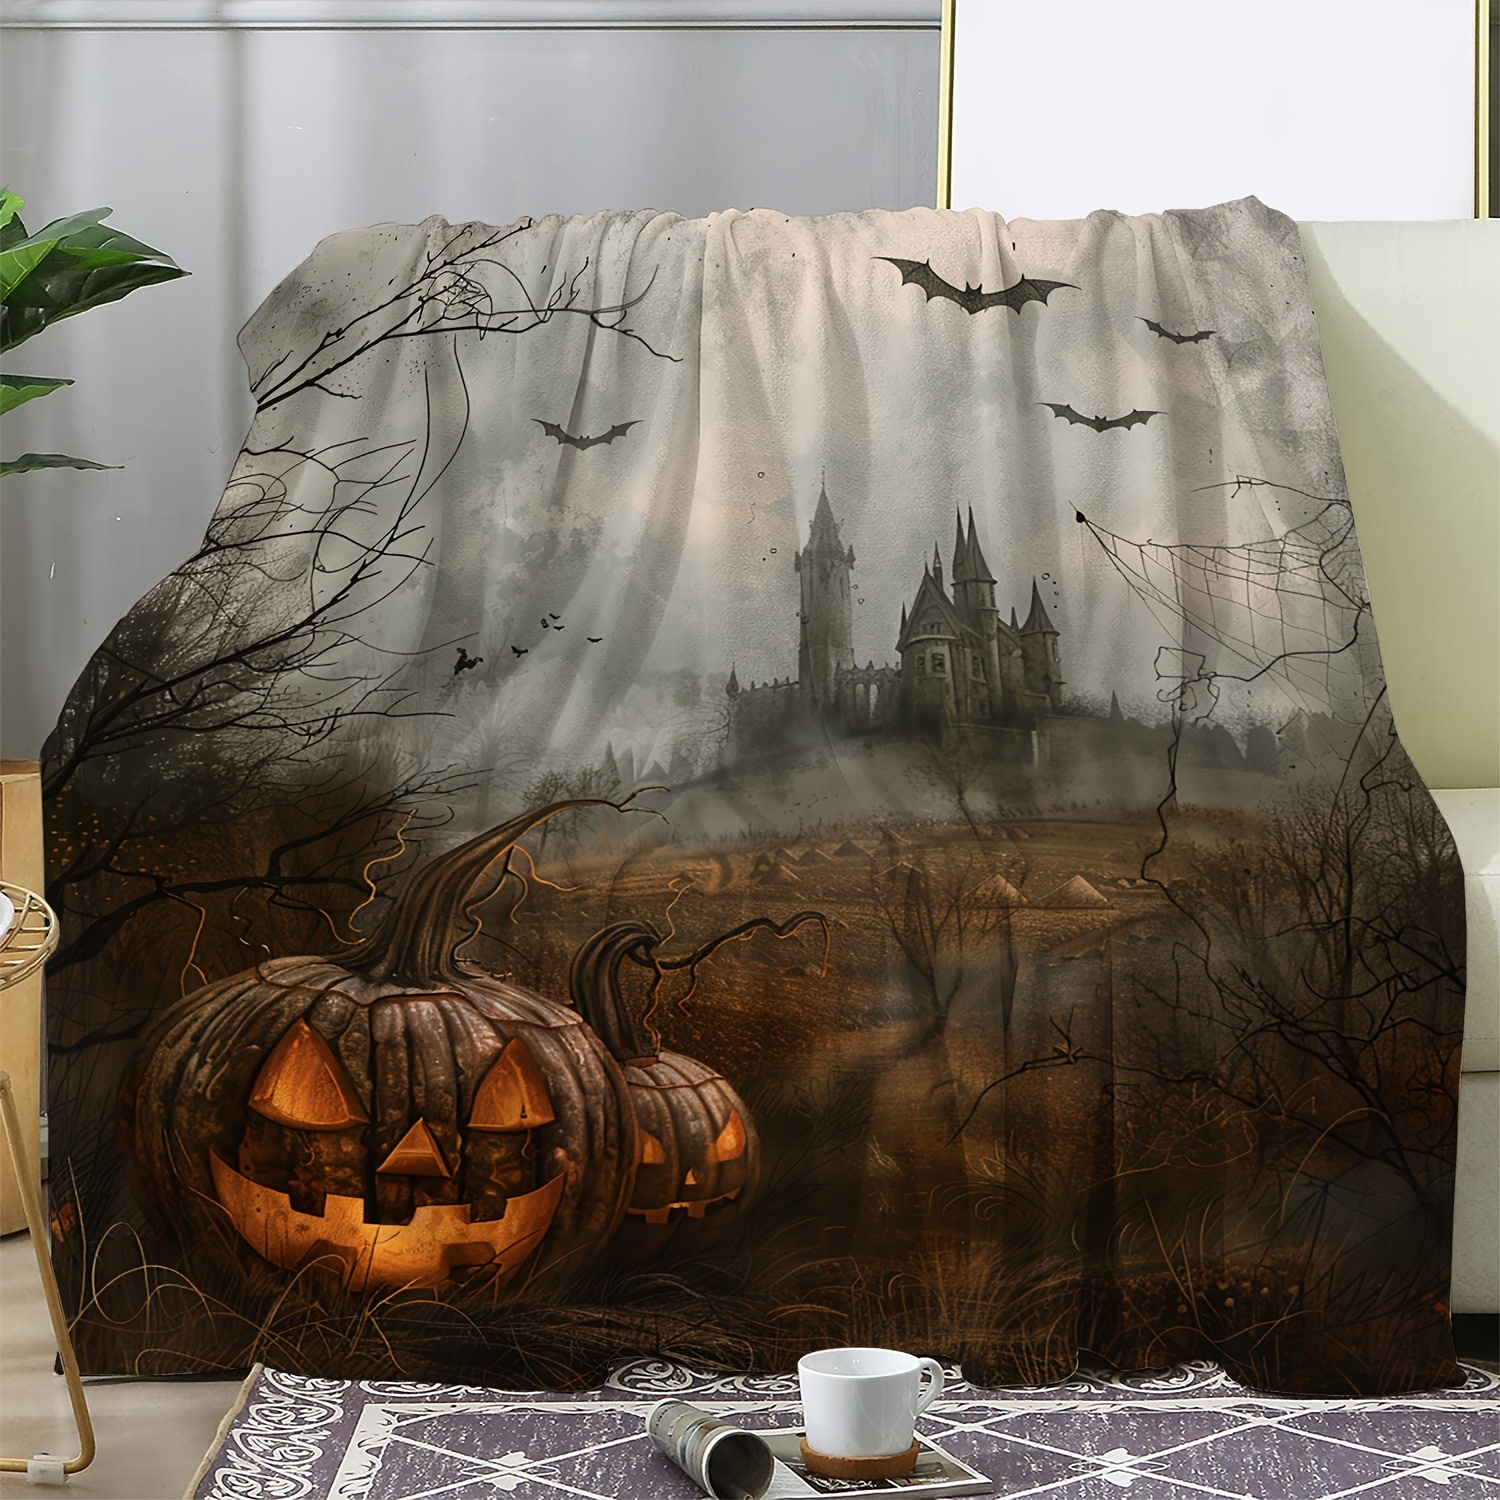 

Vintage Halloween Horror Pumpkin Castle Bat Print Flannel Blanket - Warm, Comfortable, Soft For Sofa, Bed, Couch, Car, Office, Camping, Travel - All-season Gift Blanket, 1pc